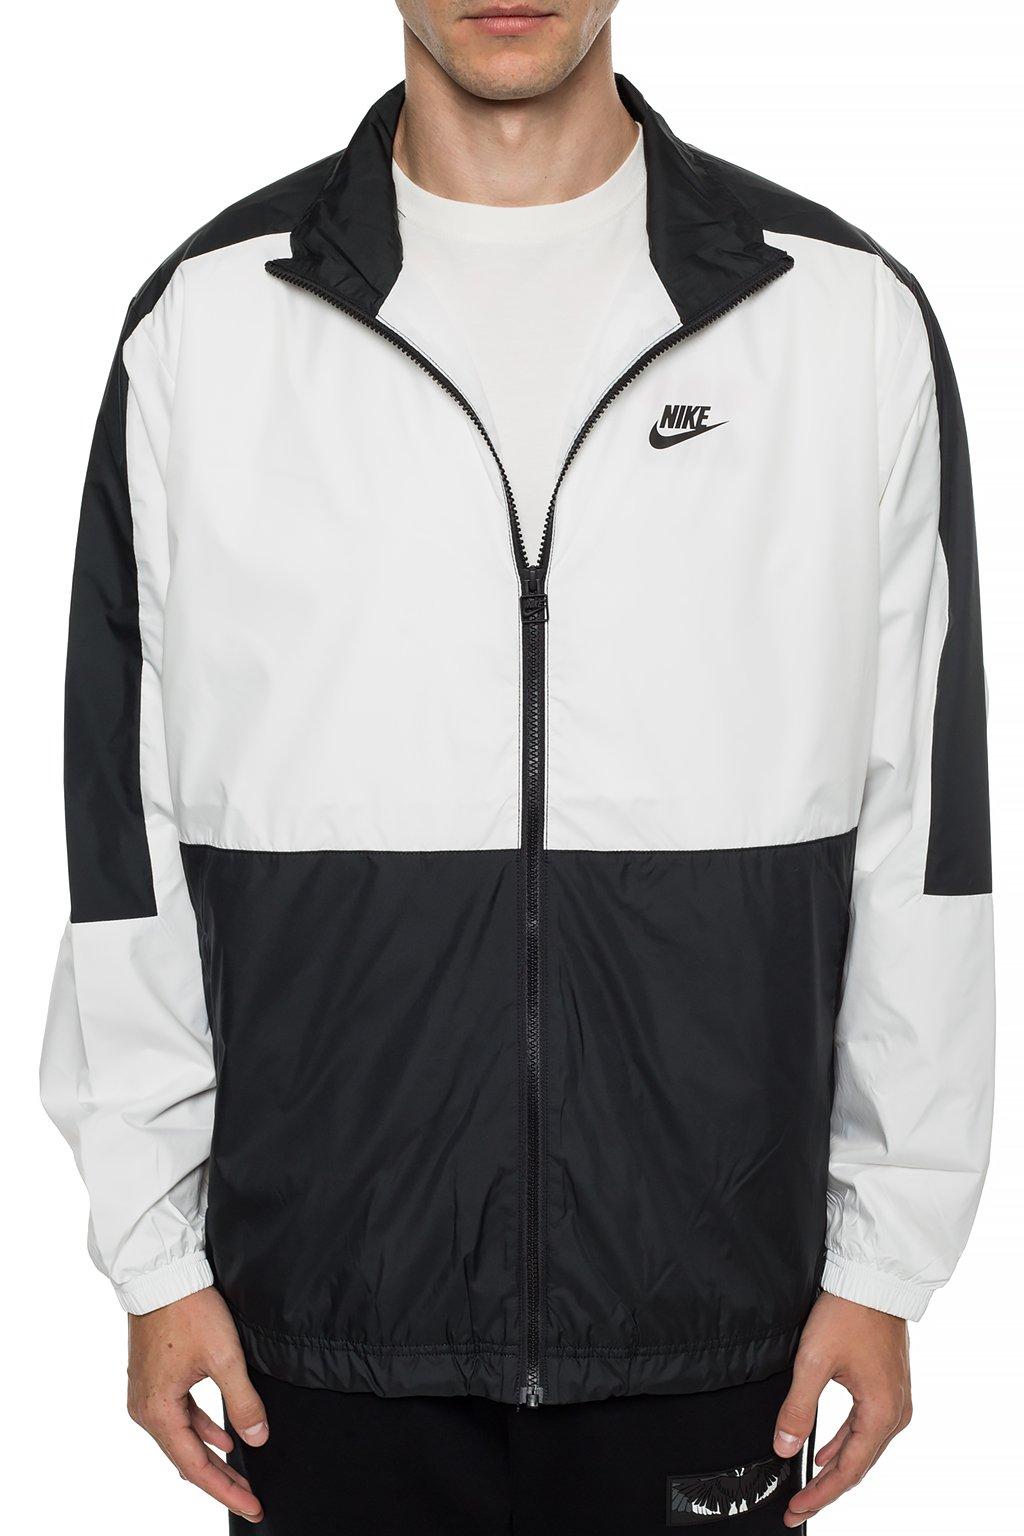 Nike Synthetic Branded Jacket in White for Men - Lyst